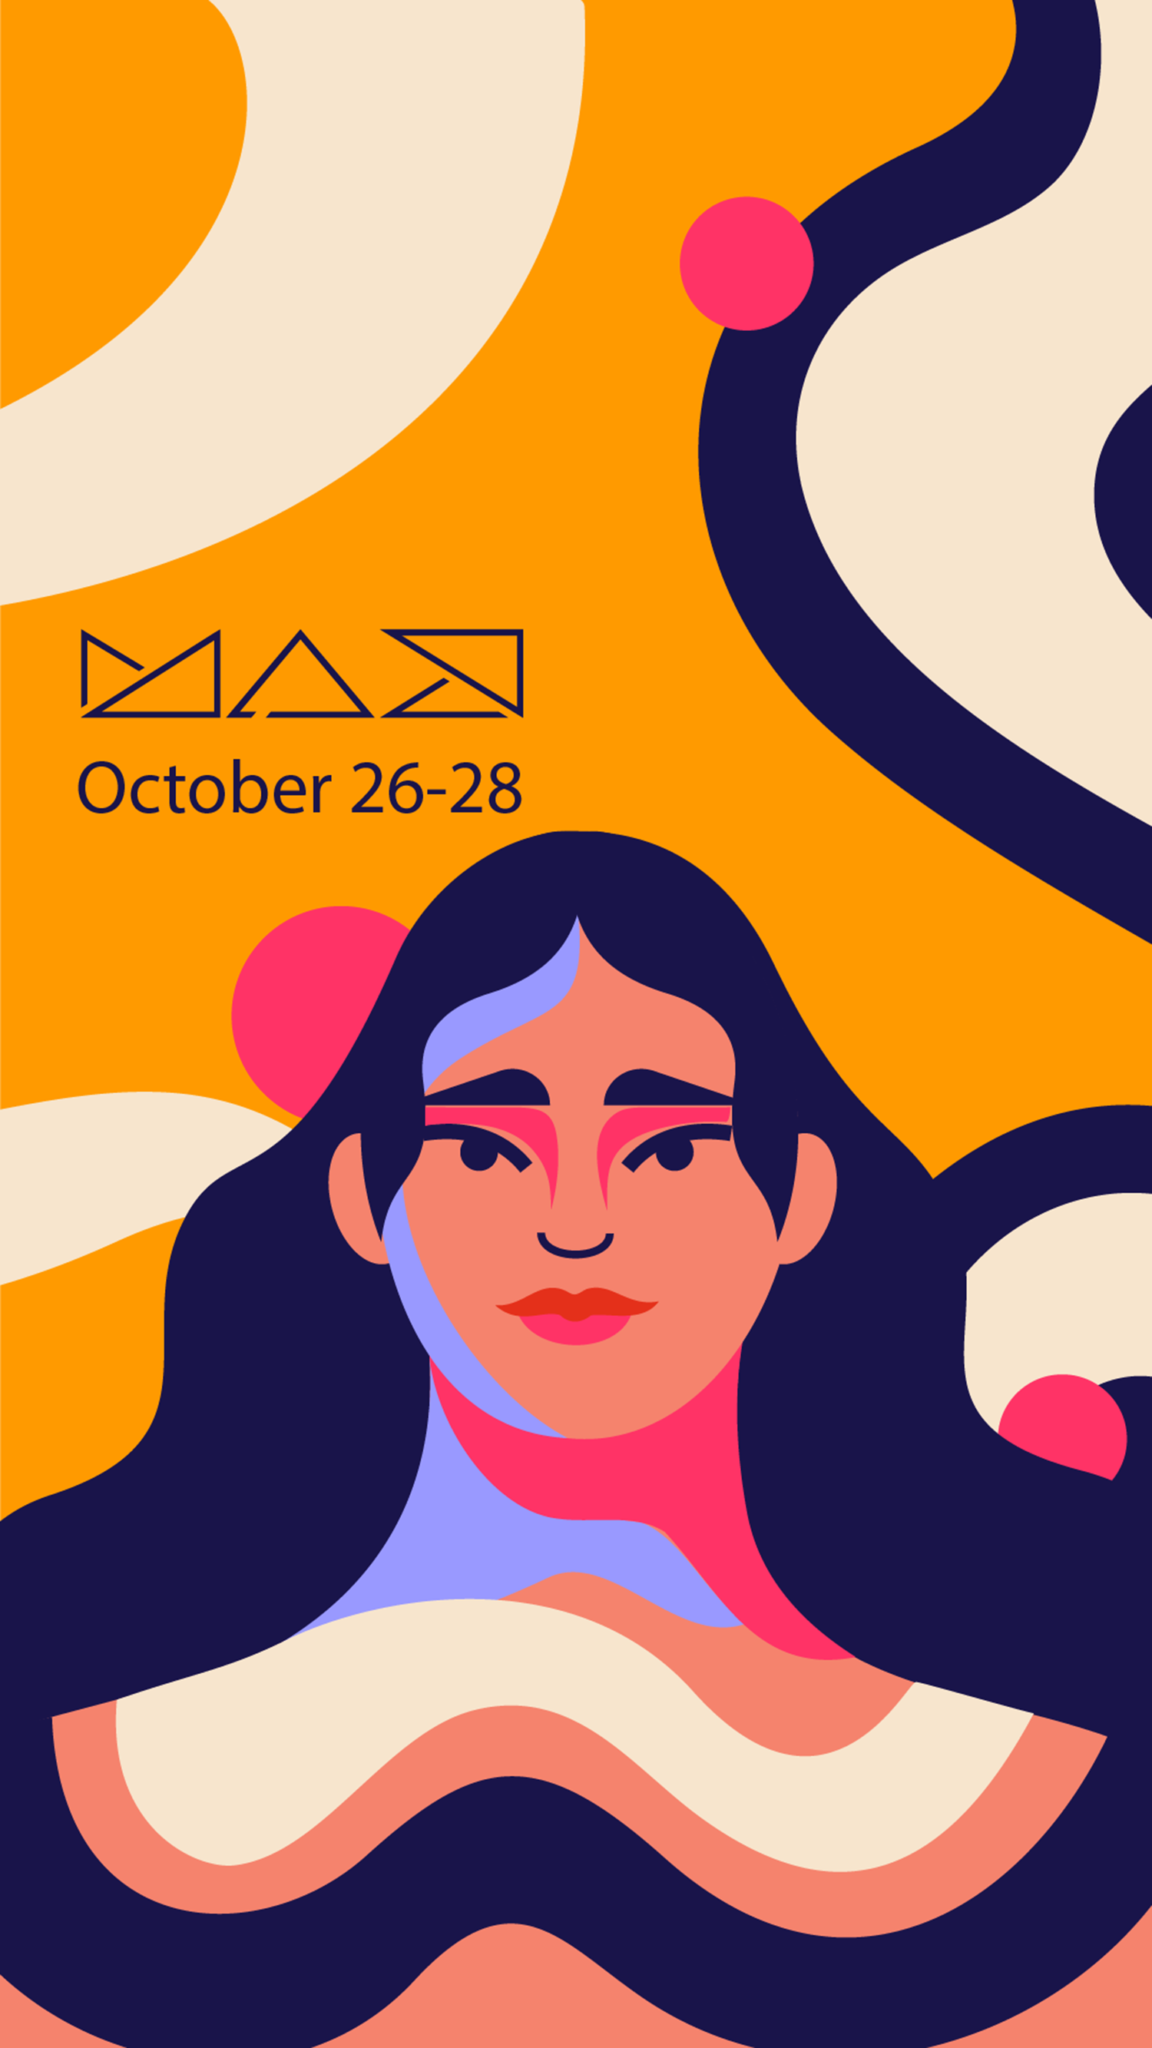 Adobe Max promo poster 2021 by Monsie